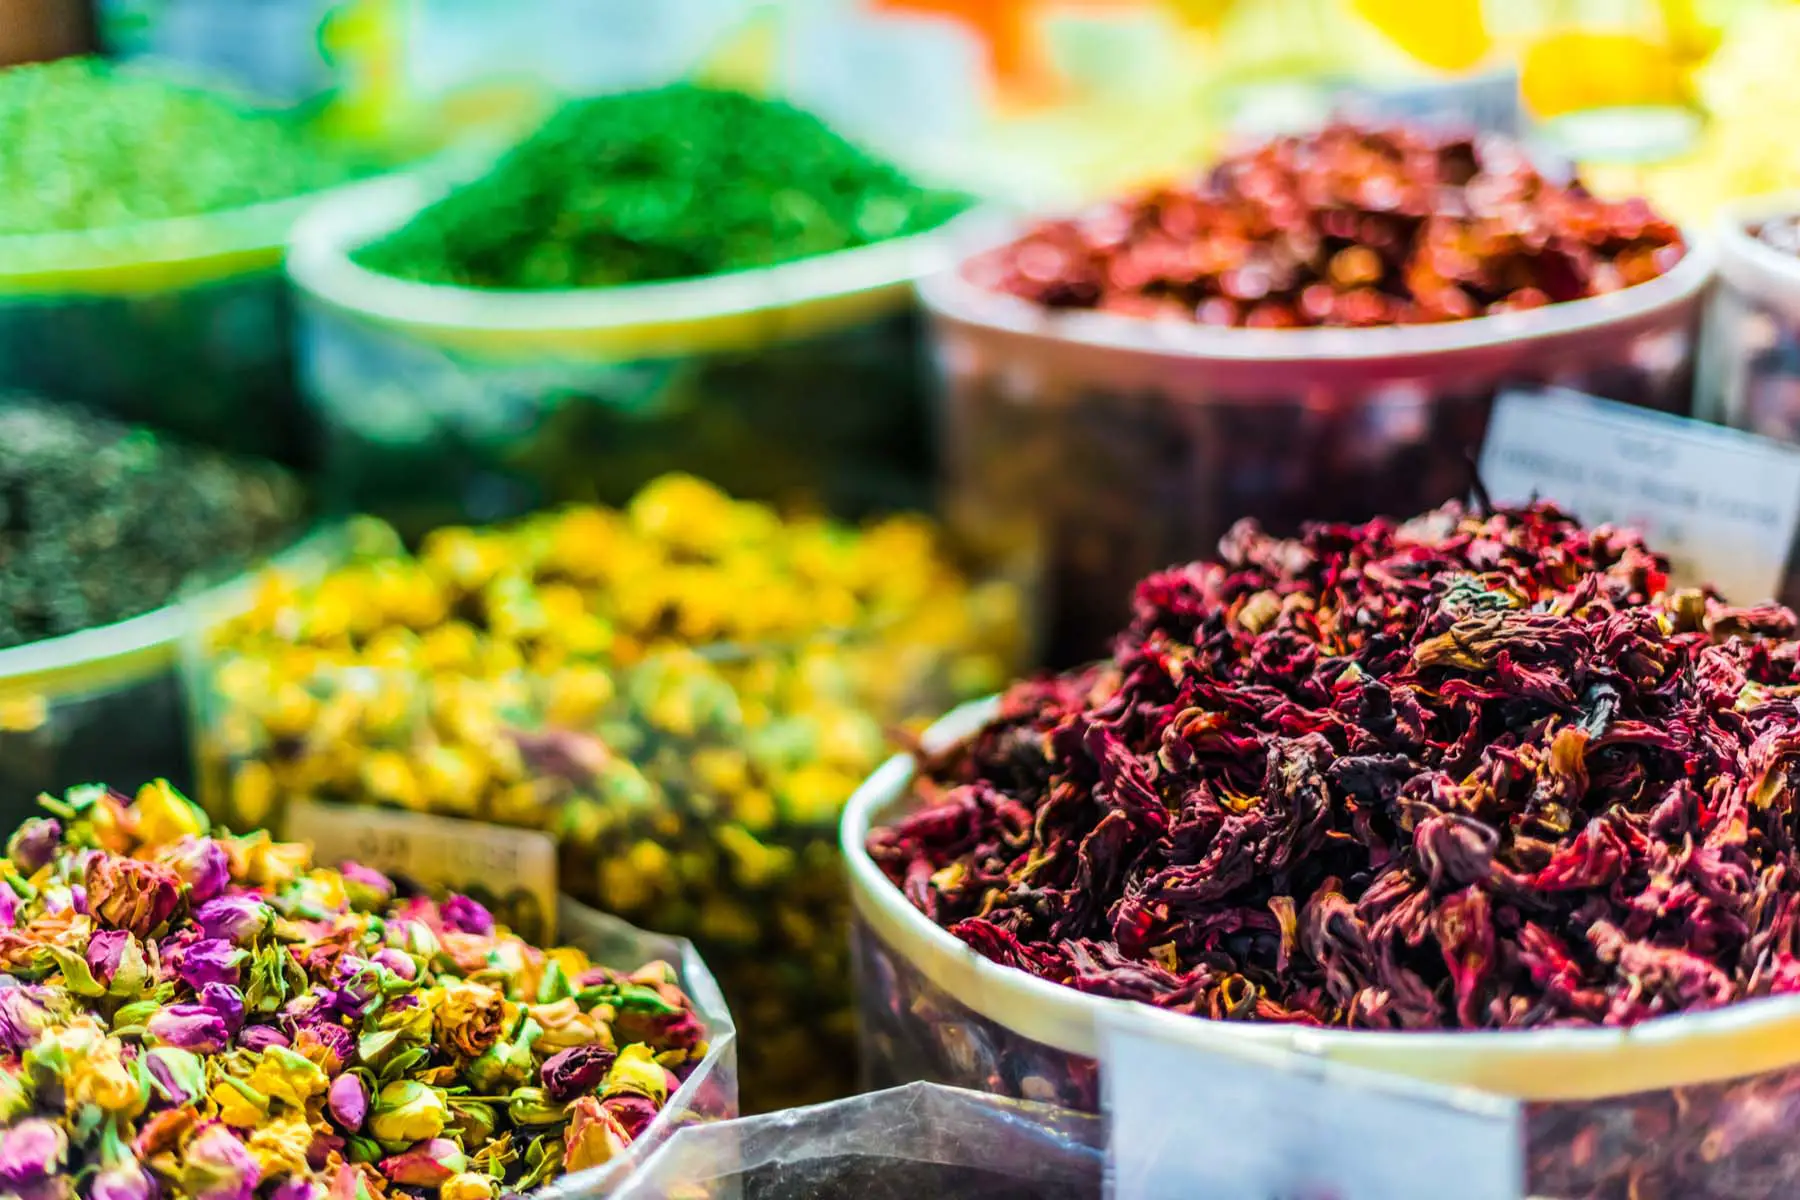 Bowls of colorful spices in Qatari marketplace